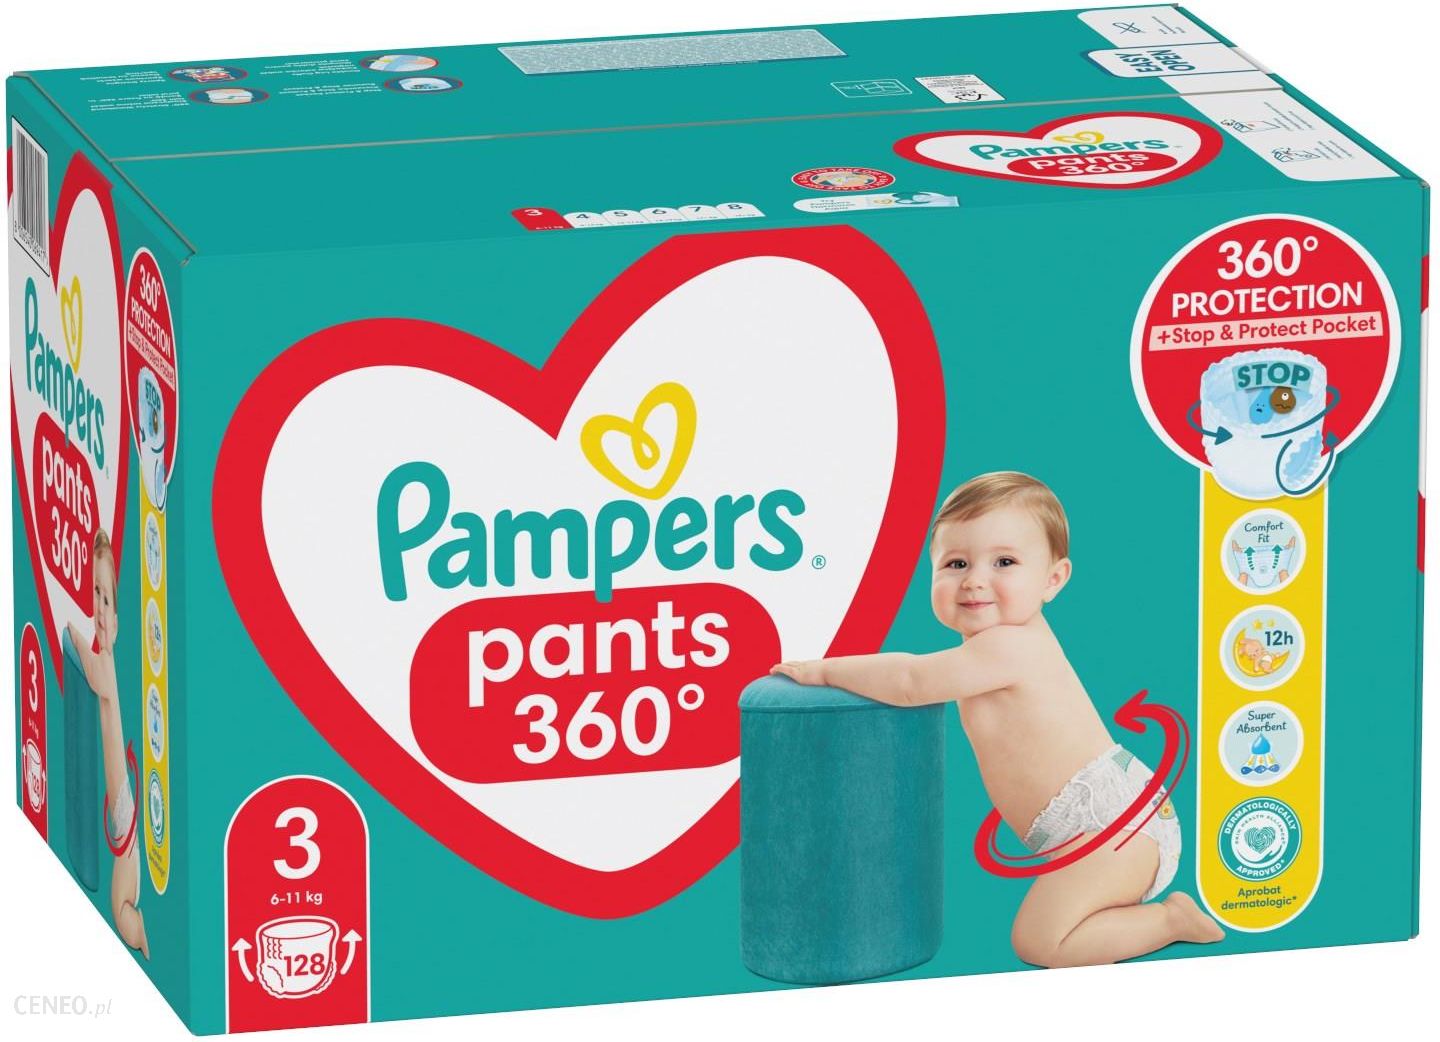 pampers 2 a dada3